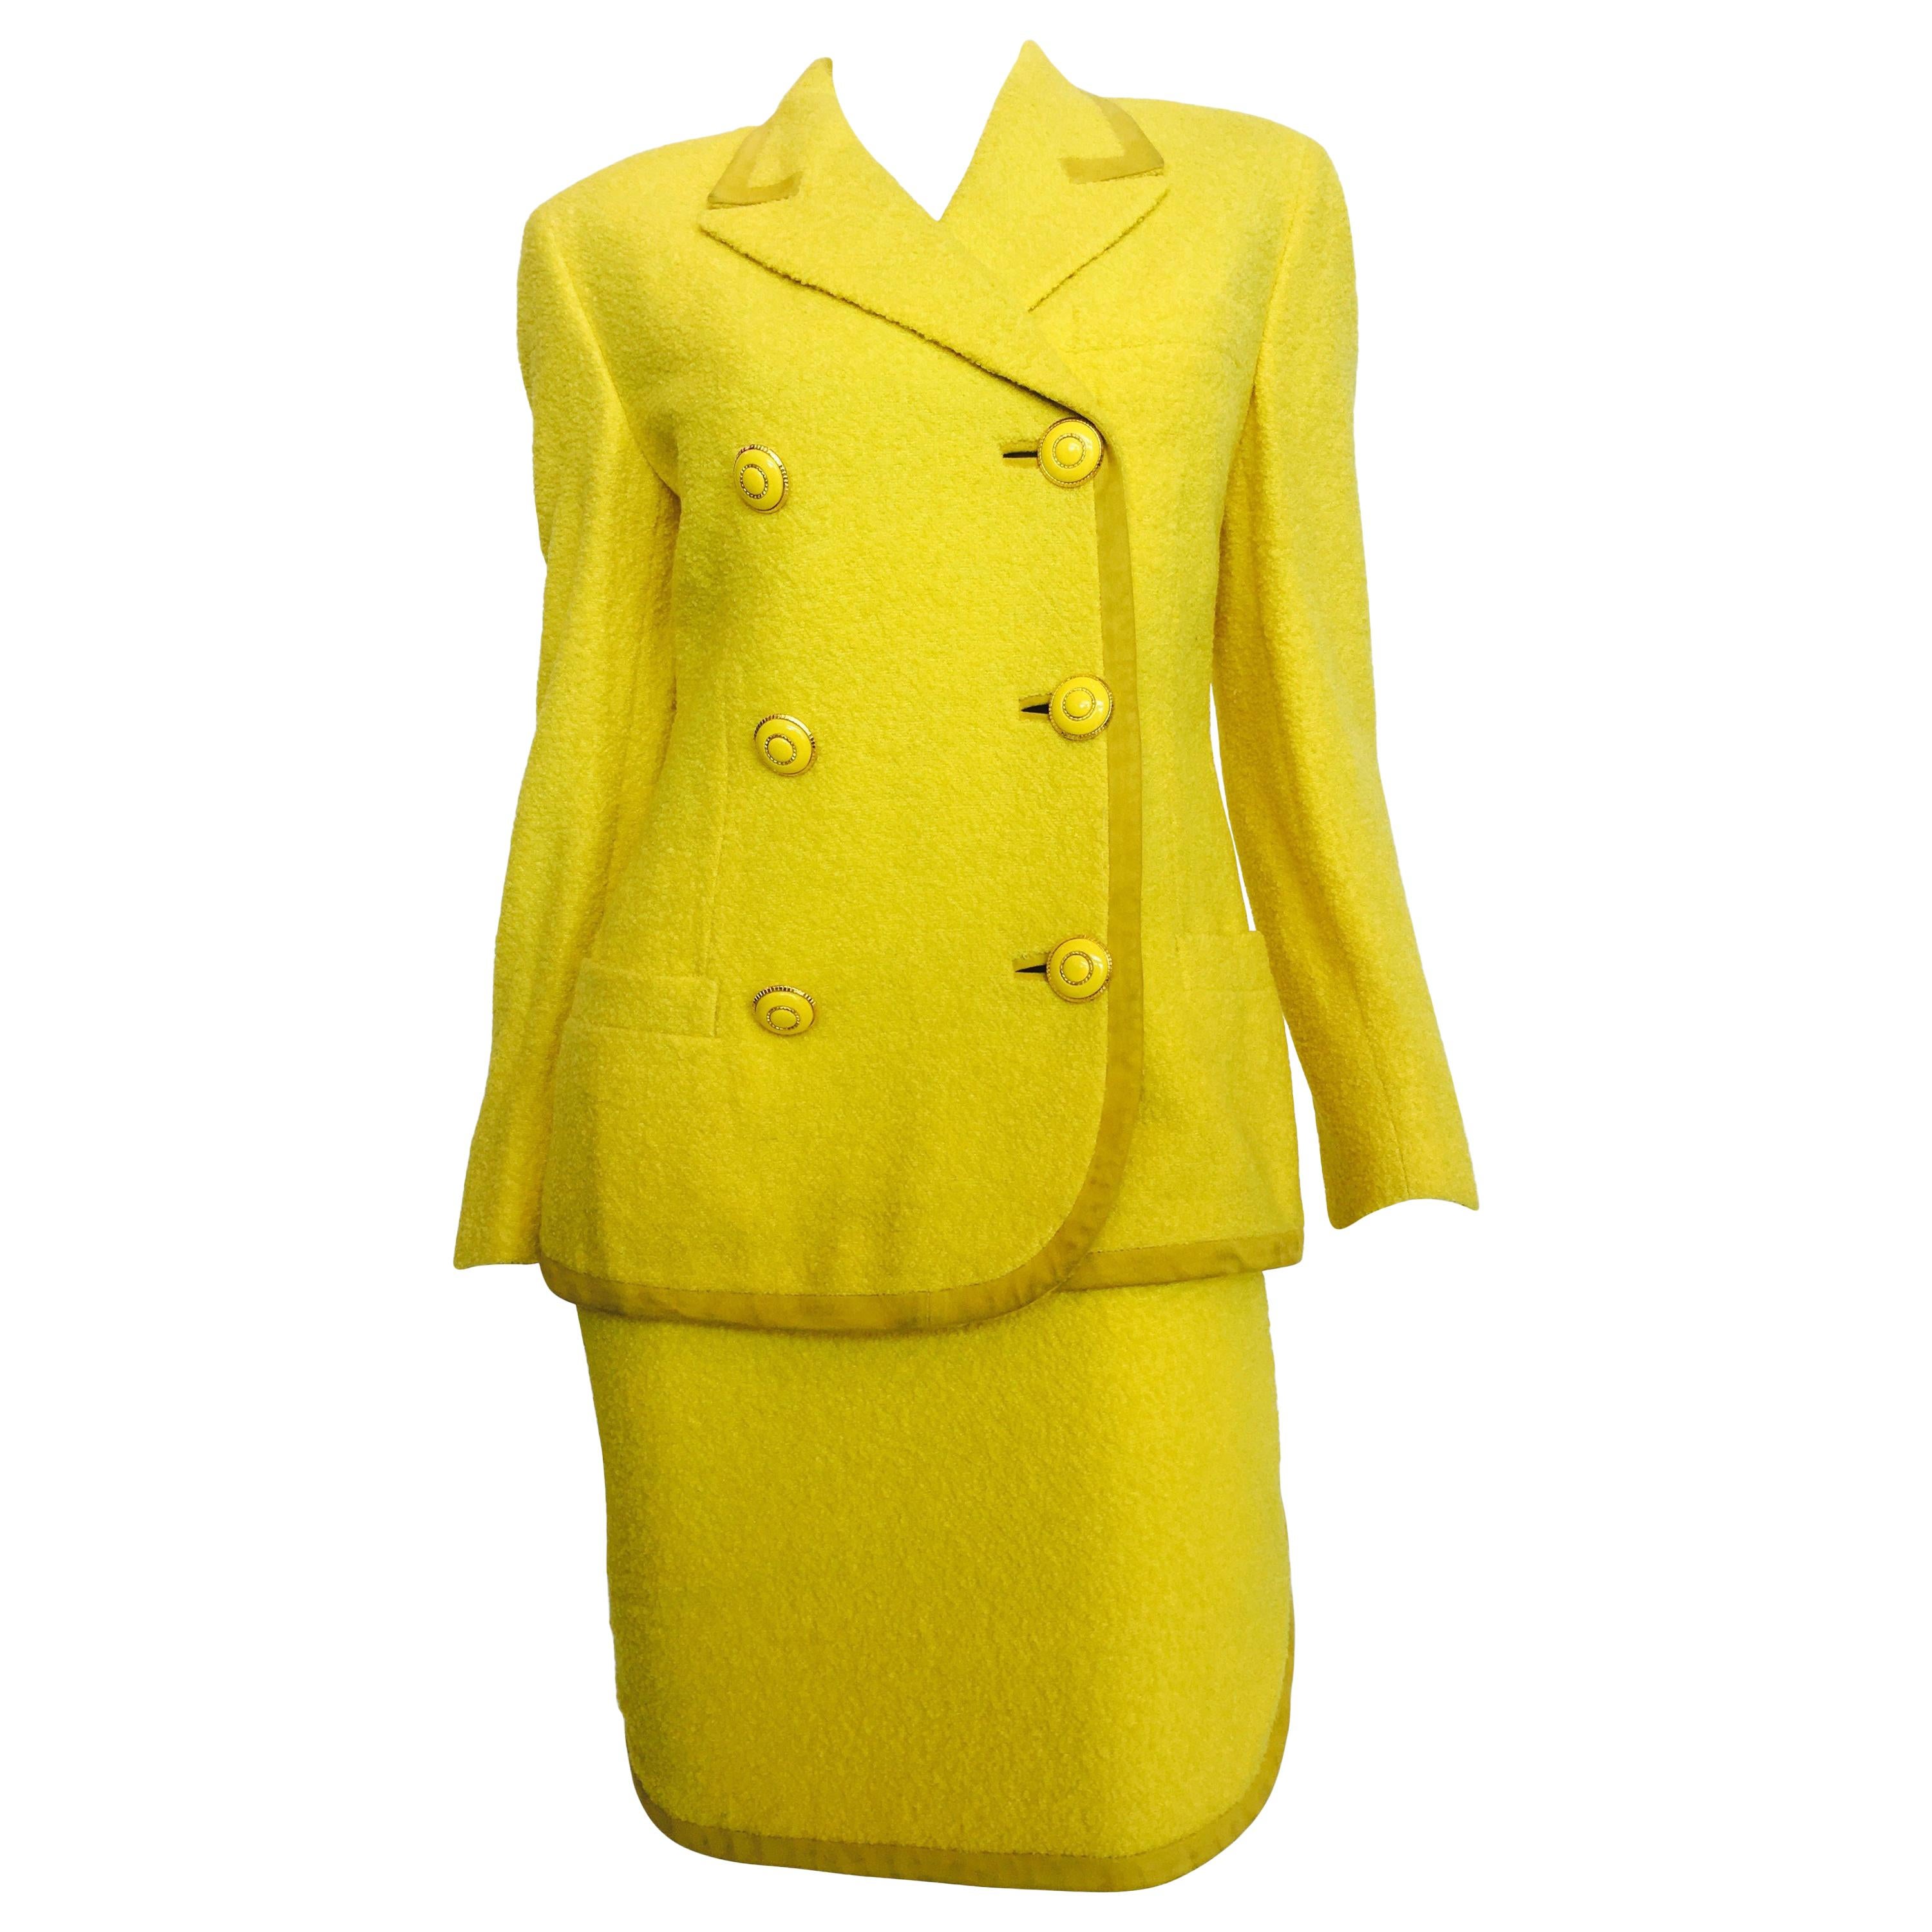 Gianni Versace Yellow Nubby Knit 2 Pc Skirt Suit